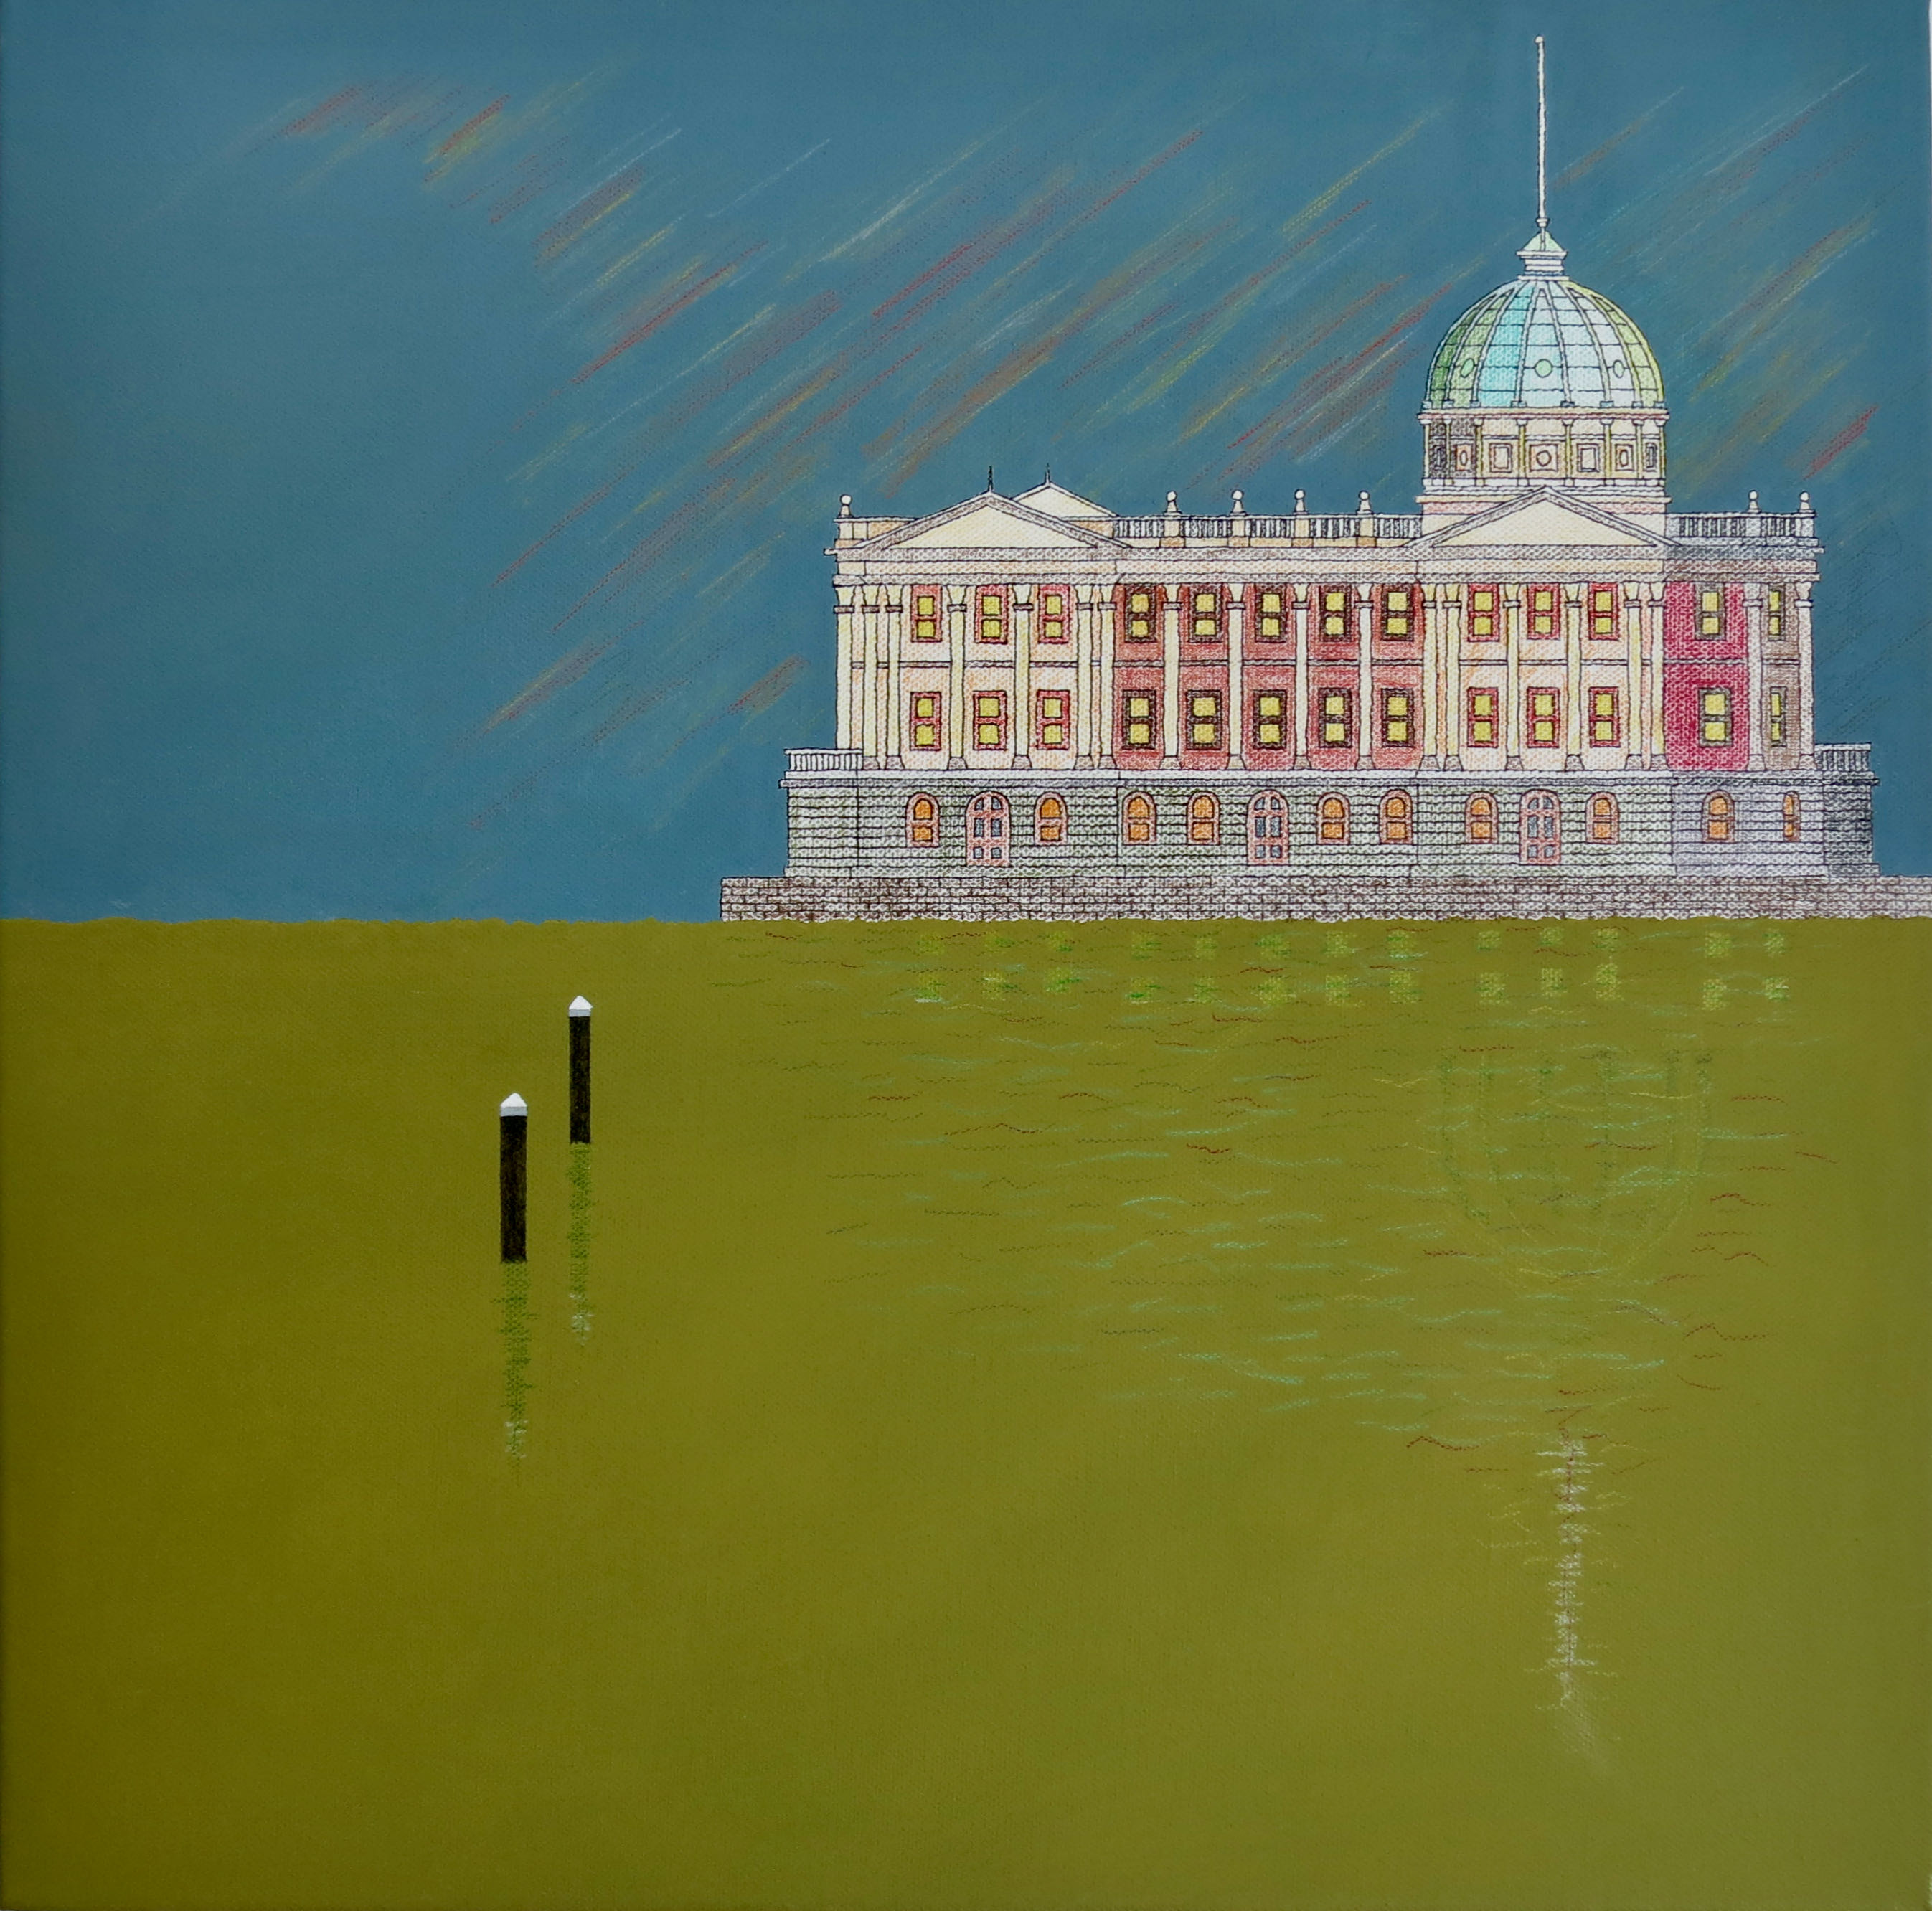 10 Years On, After the Flood, Customs House by Phil Tamblyn | Lethbridge 20000 2021 Finalists | Lethbridge Gallery